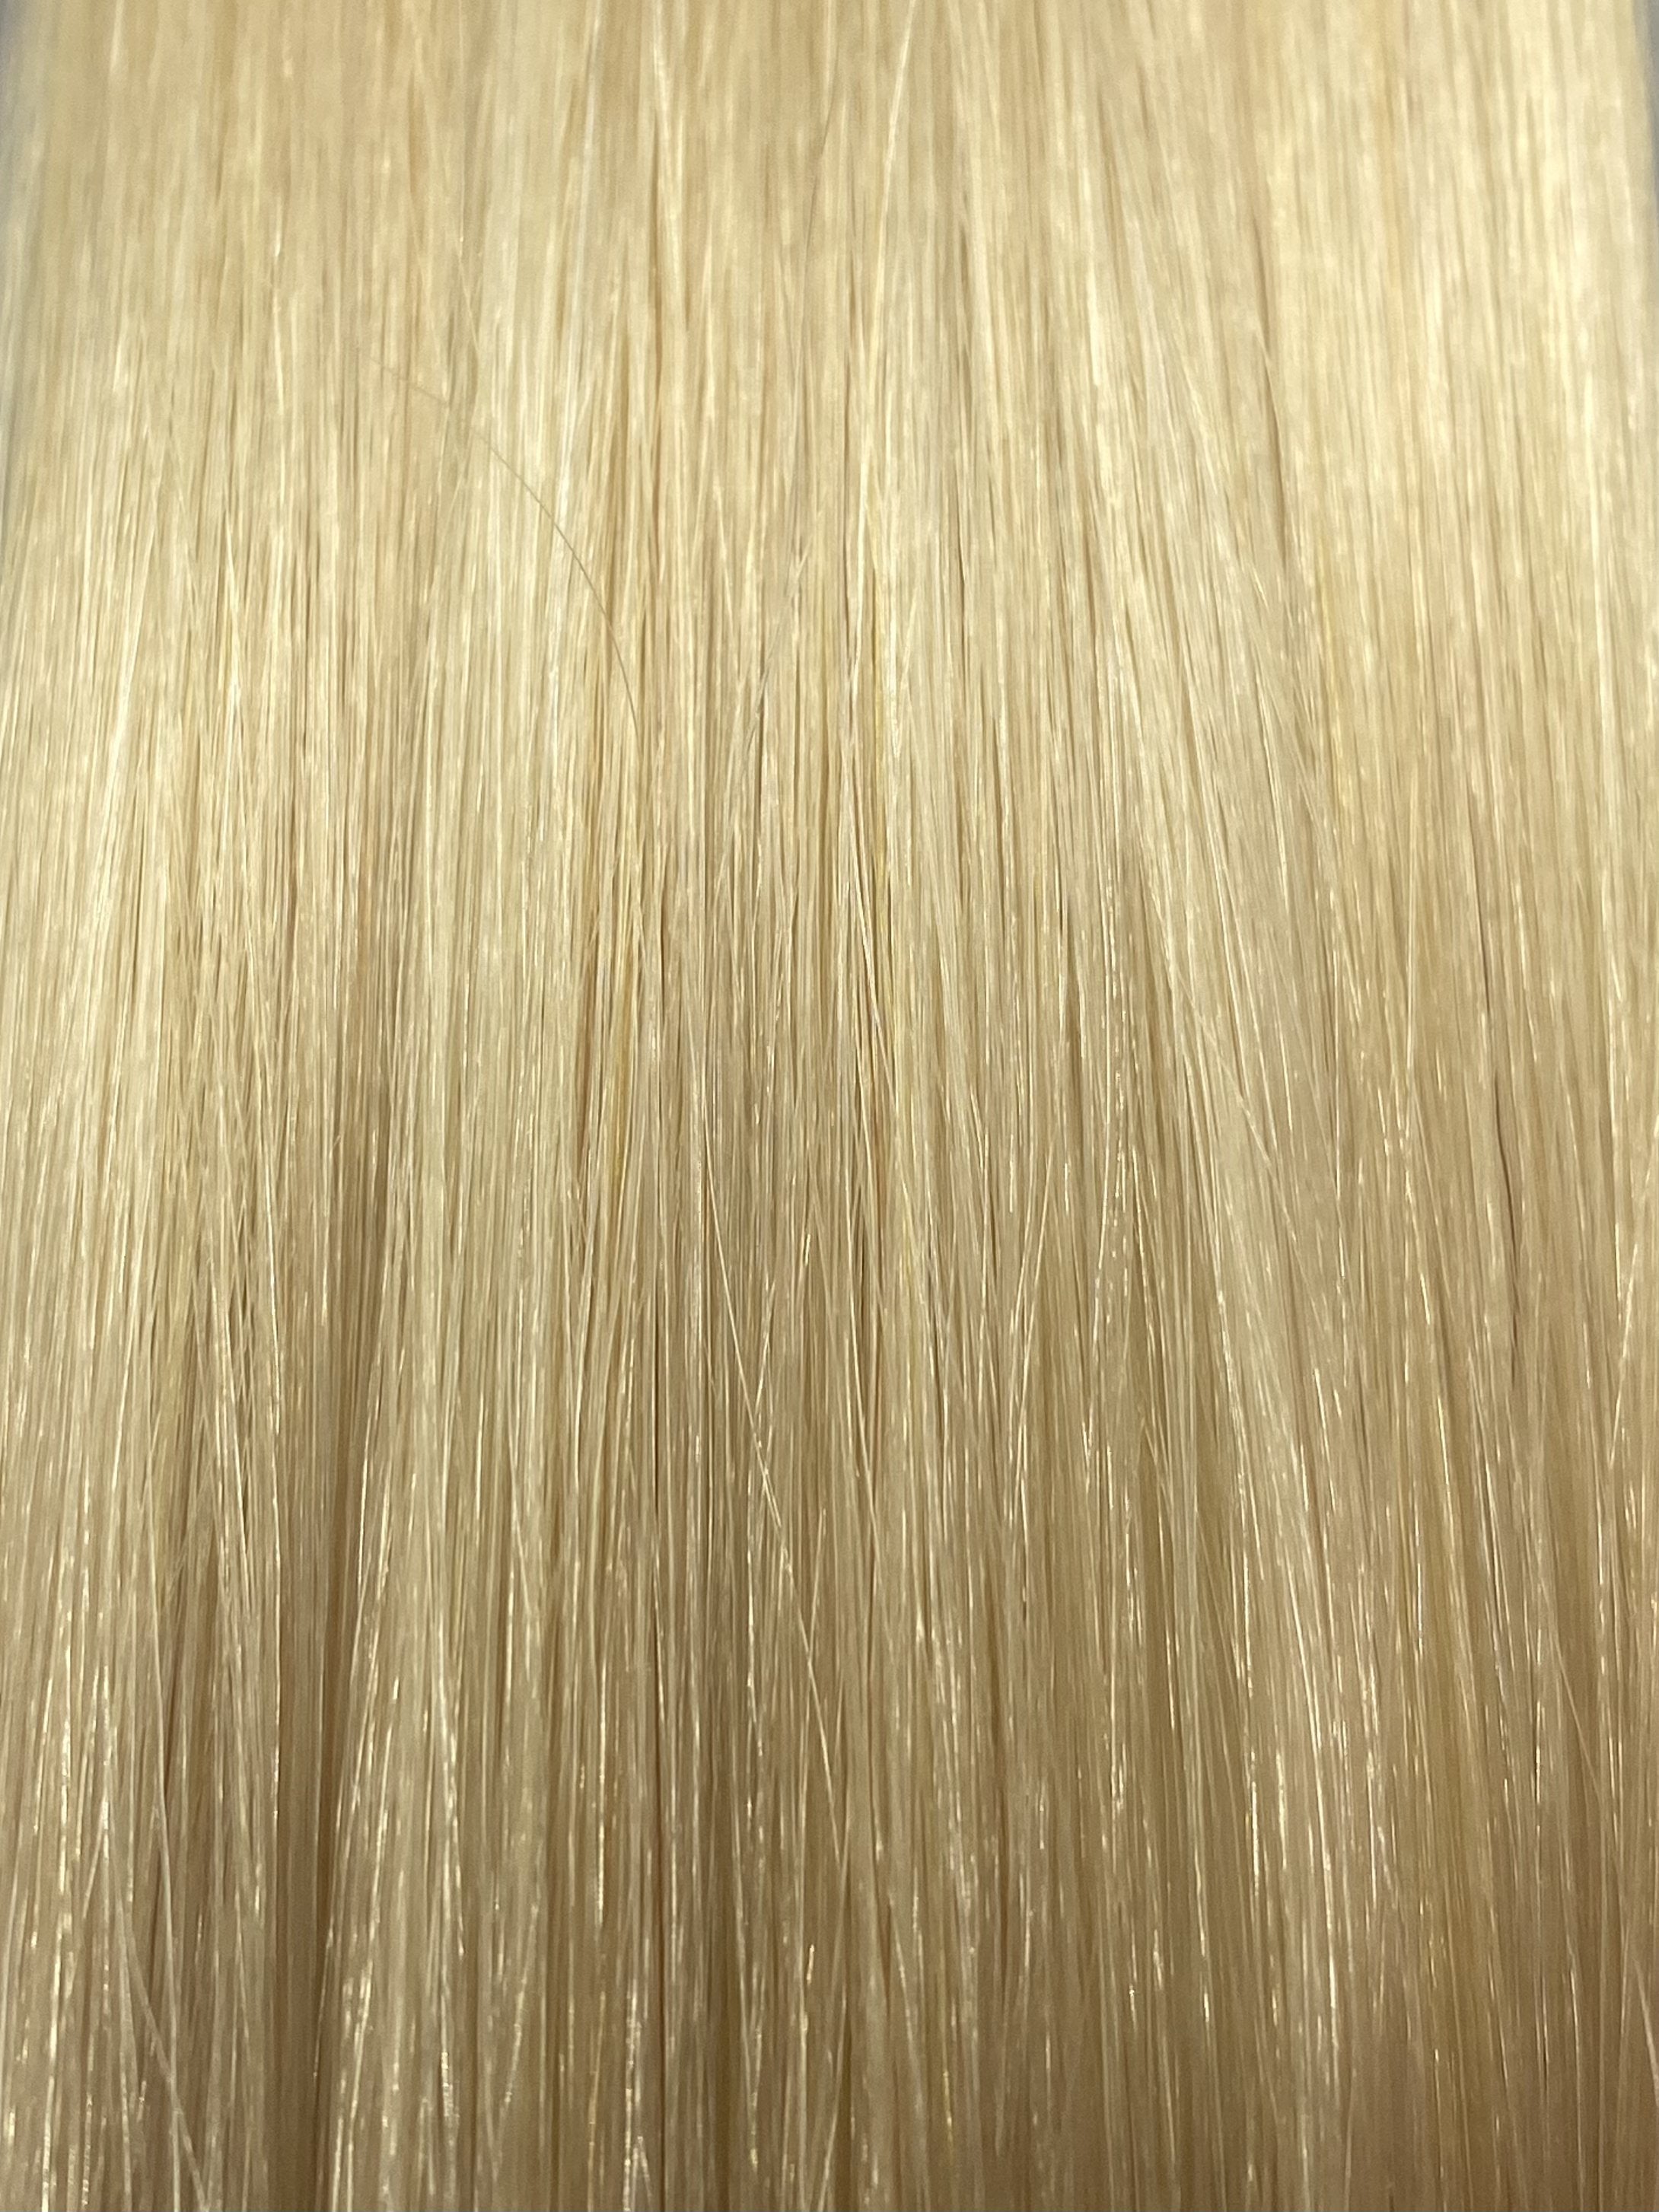 FUSION #1002 VERY LIGHT ASH BLONDE 60CM/ 24 INCHES  -  25 GRAMS